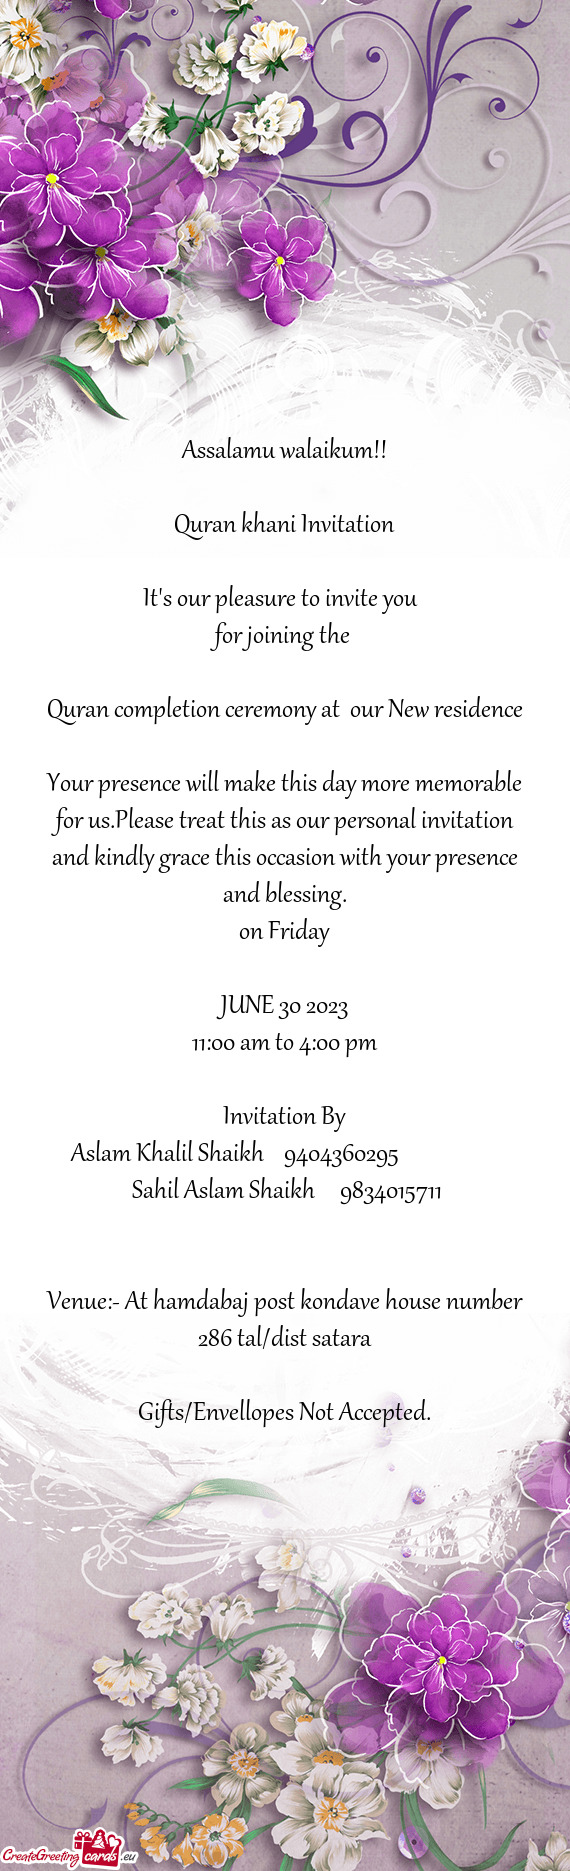 Your presence will make this day more memorable for us.Please treat this as our personal invitation